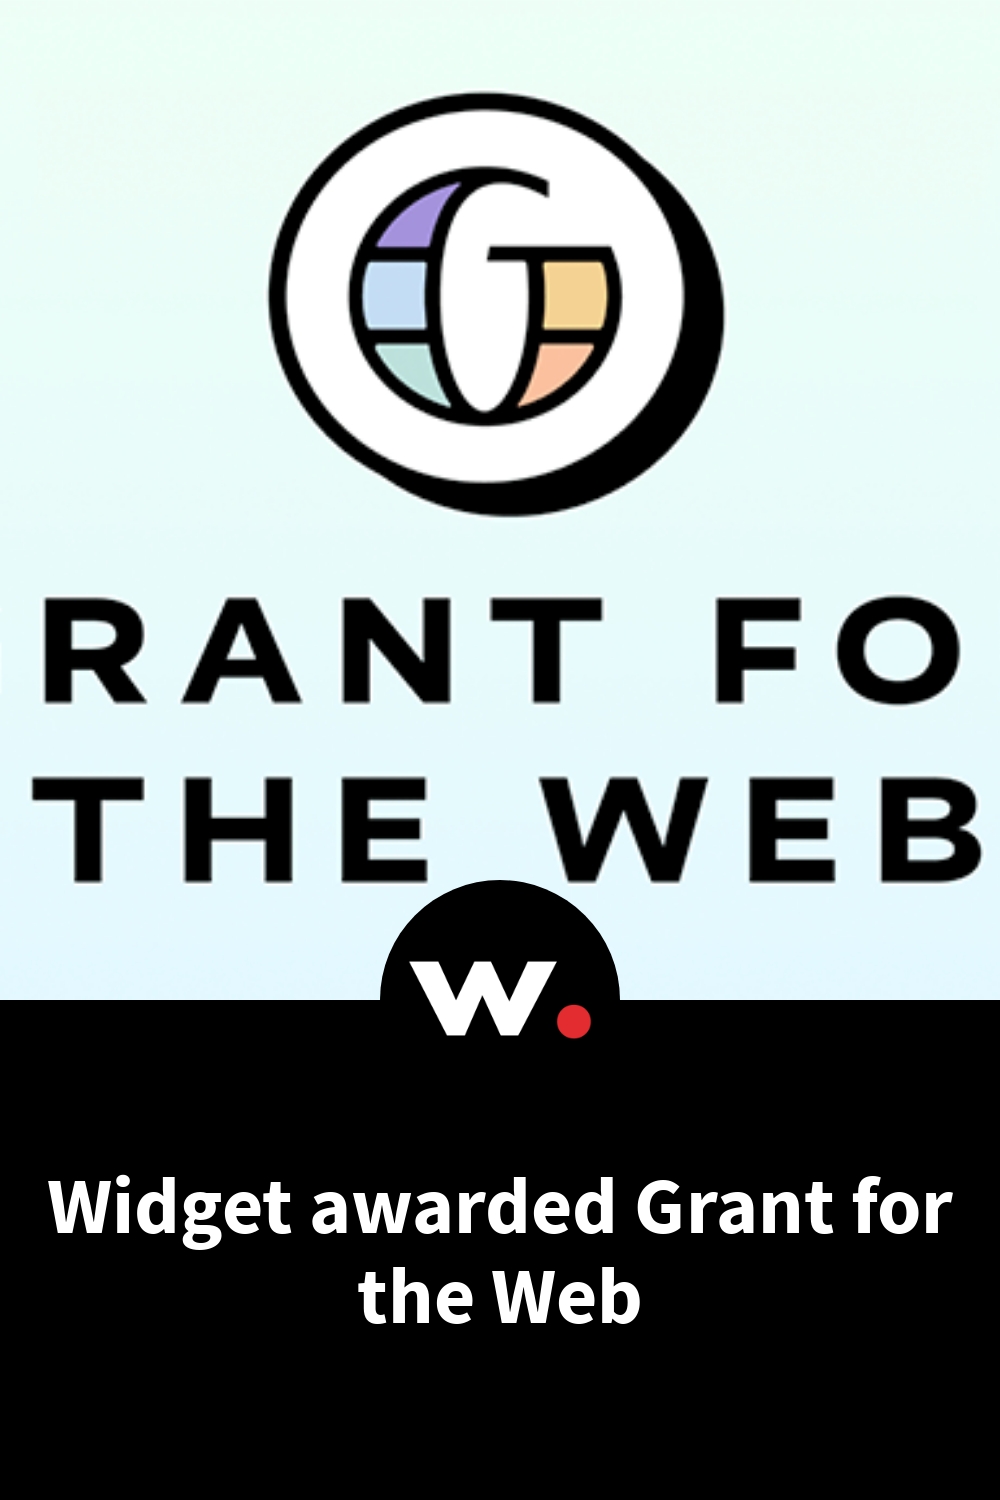 Widget awarded Grant for the Web